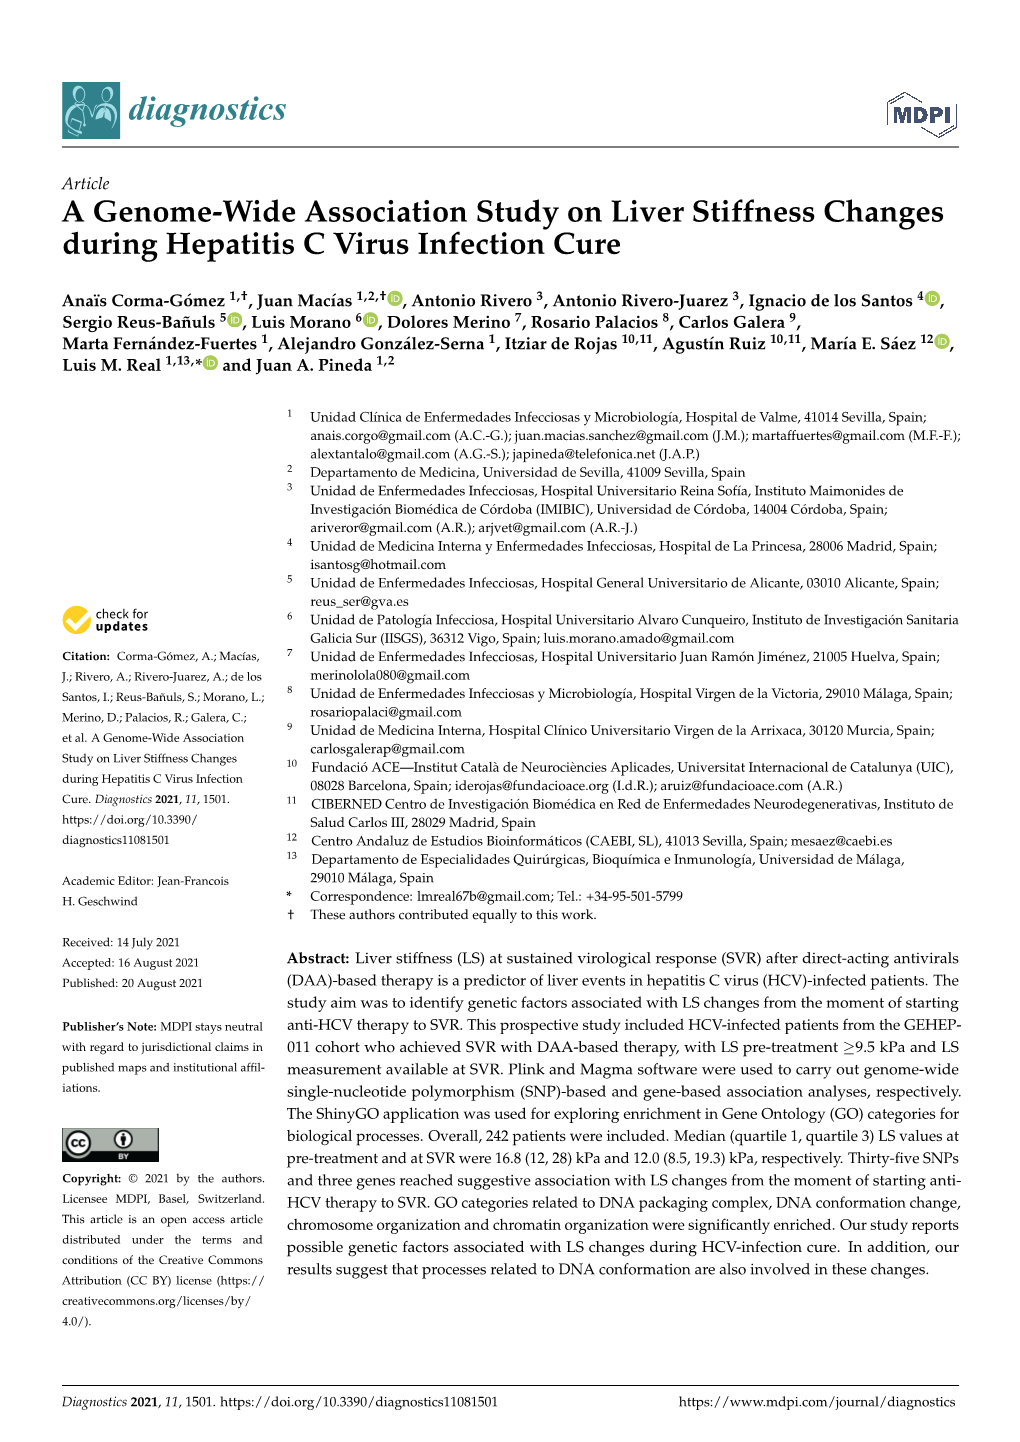 A Genome-Wide Association Study on Liver Stiffness Changes During Hepatitis C Virus Infection Cure